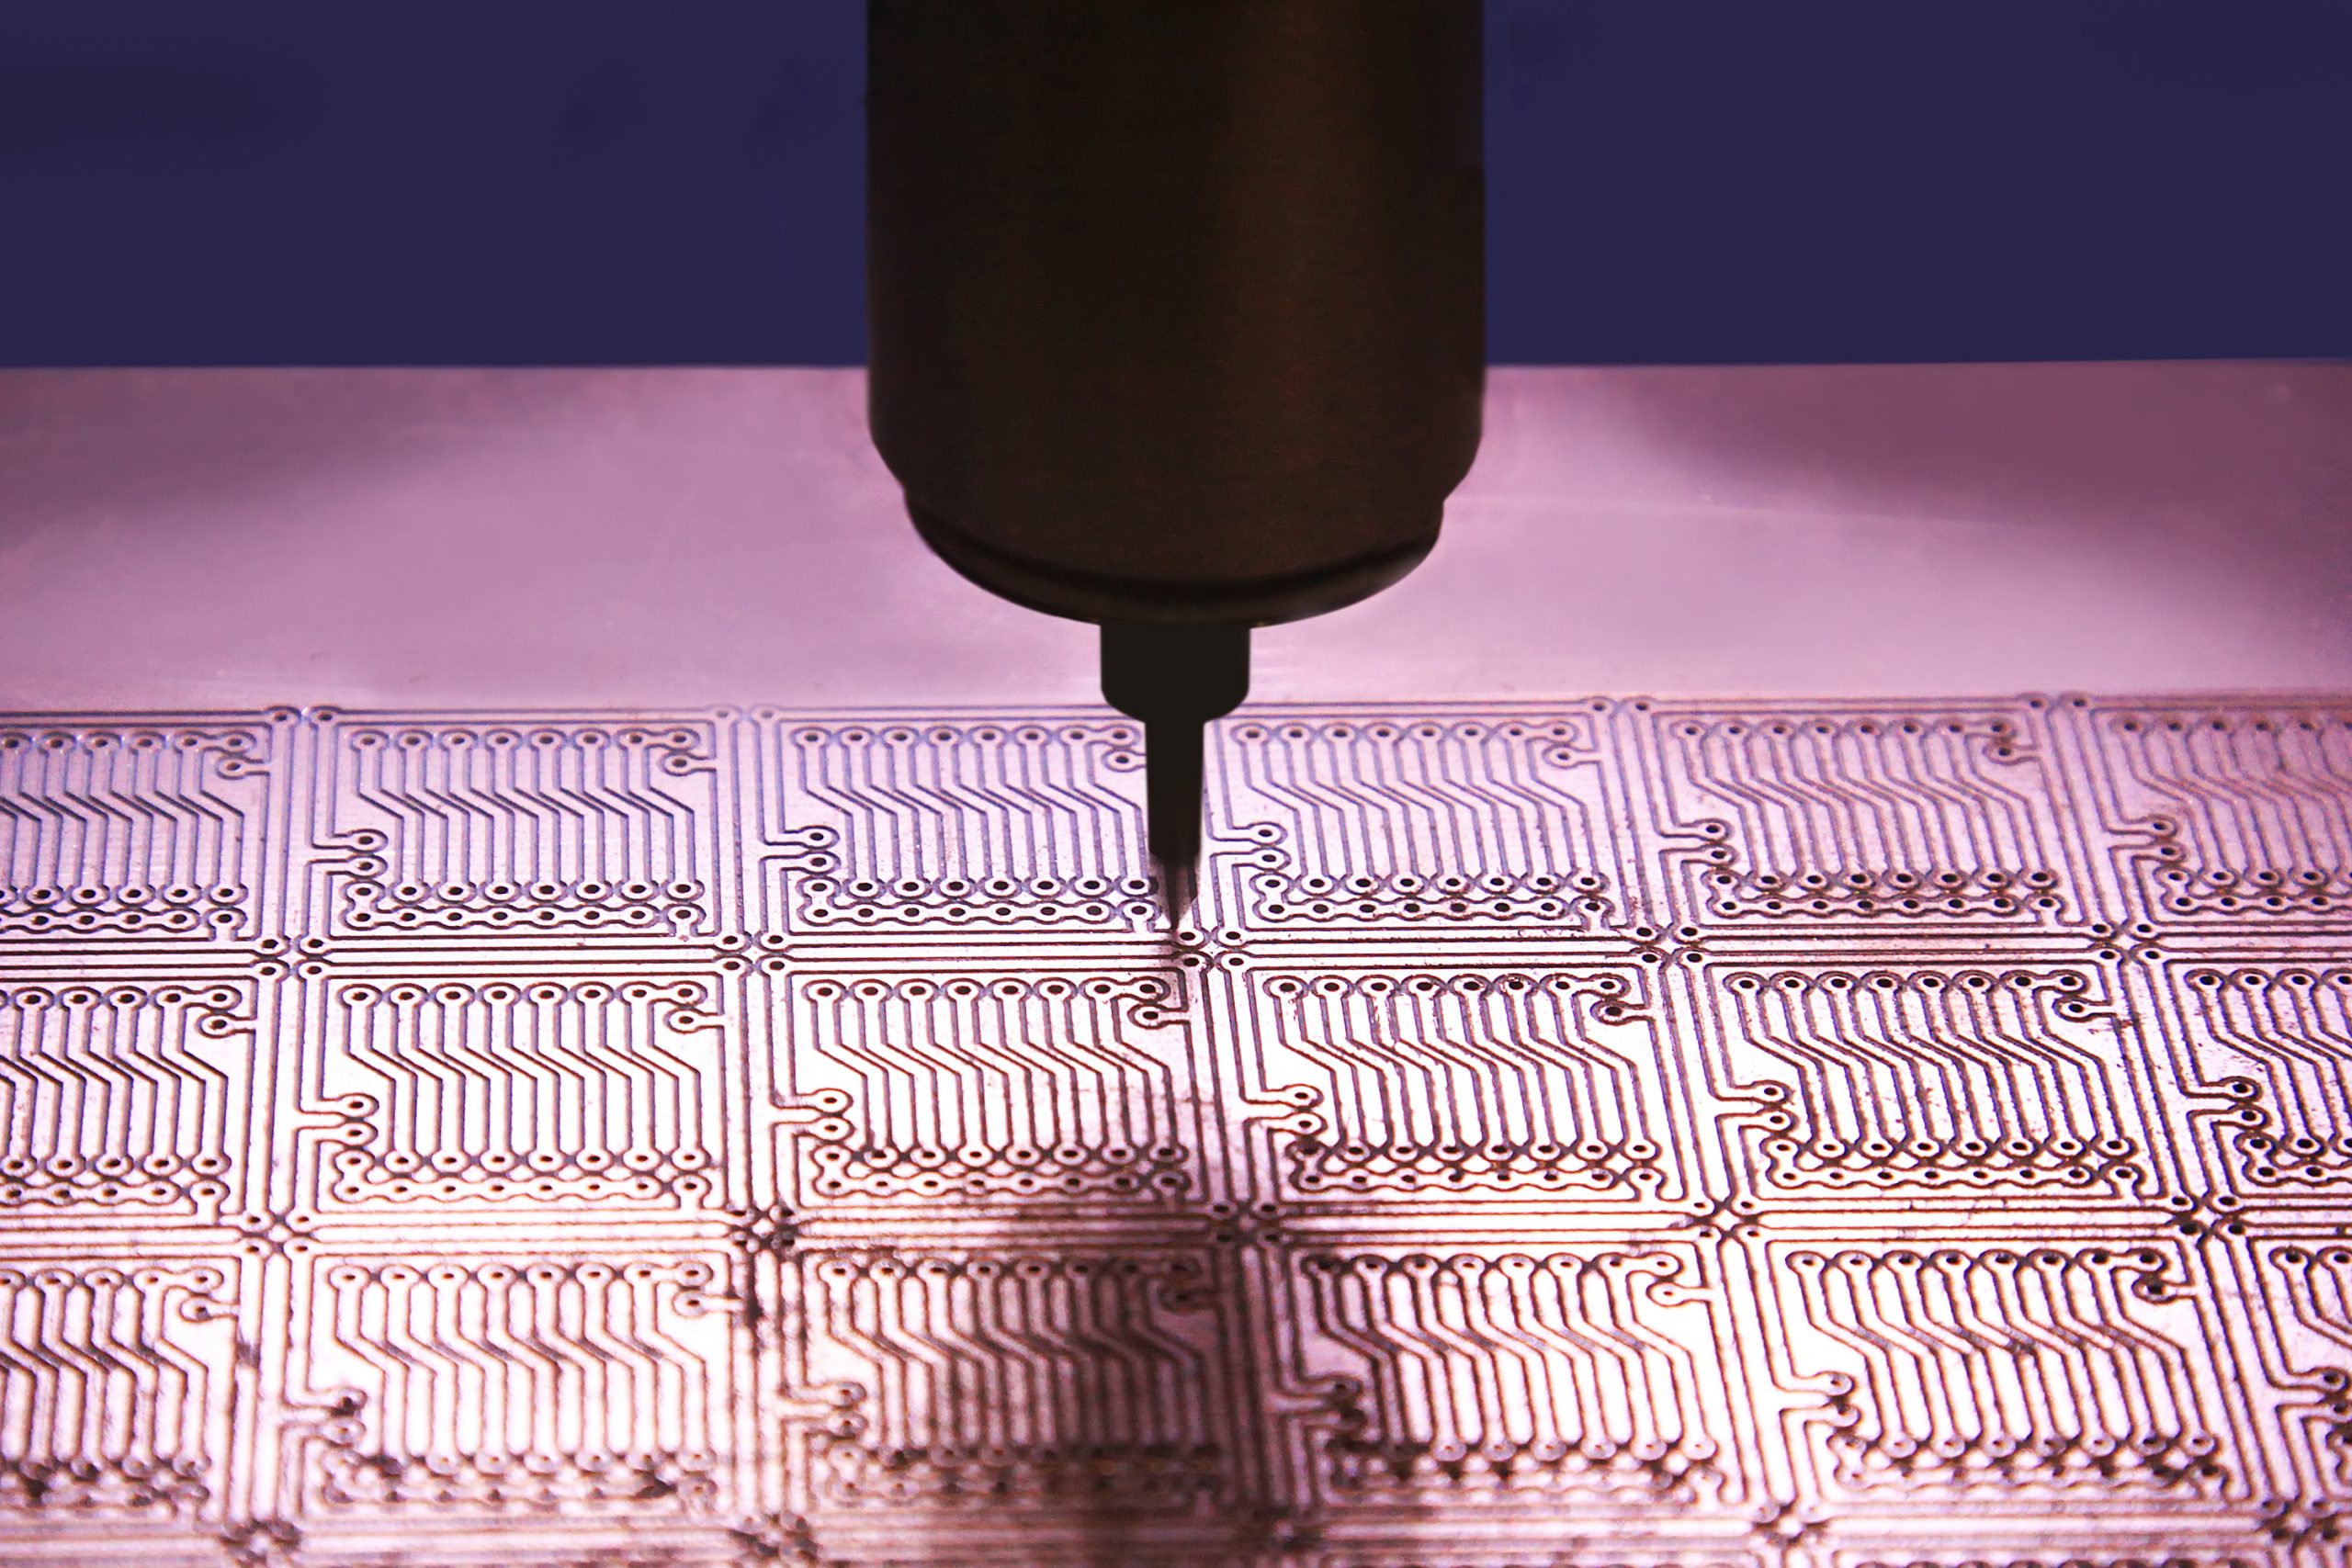 Production of printed circuit boards